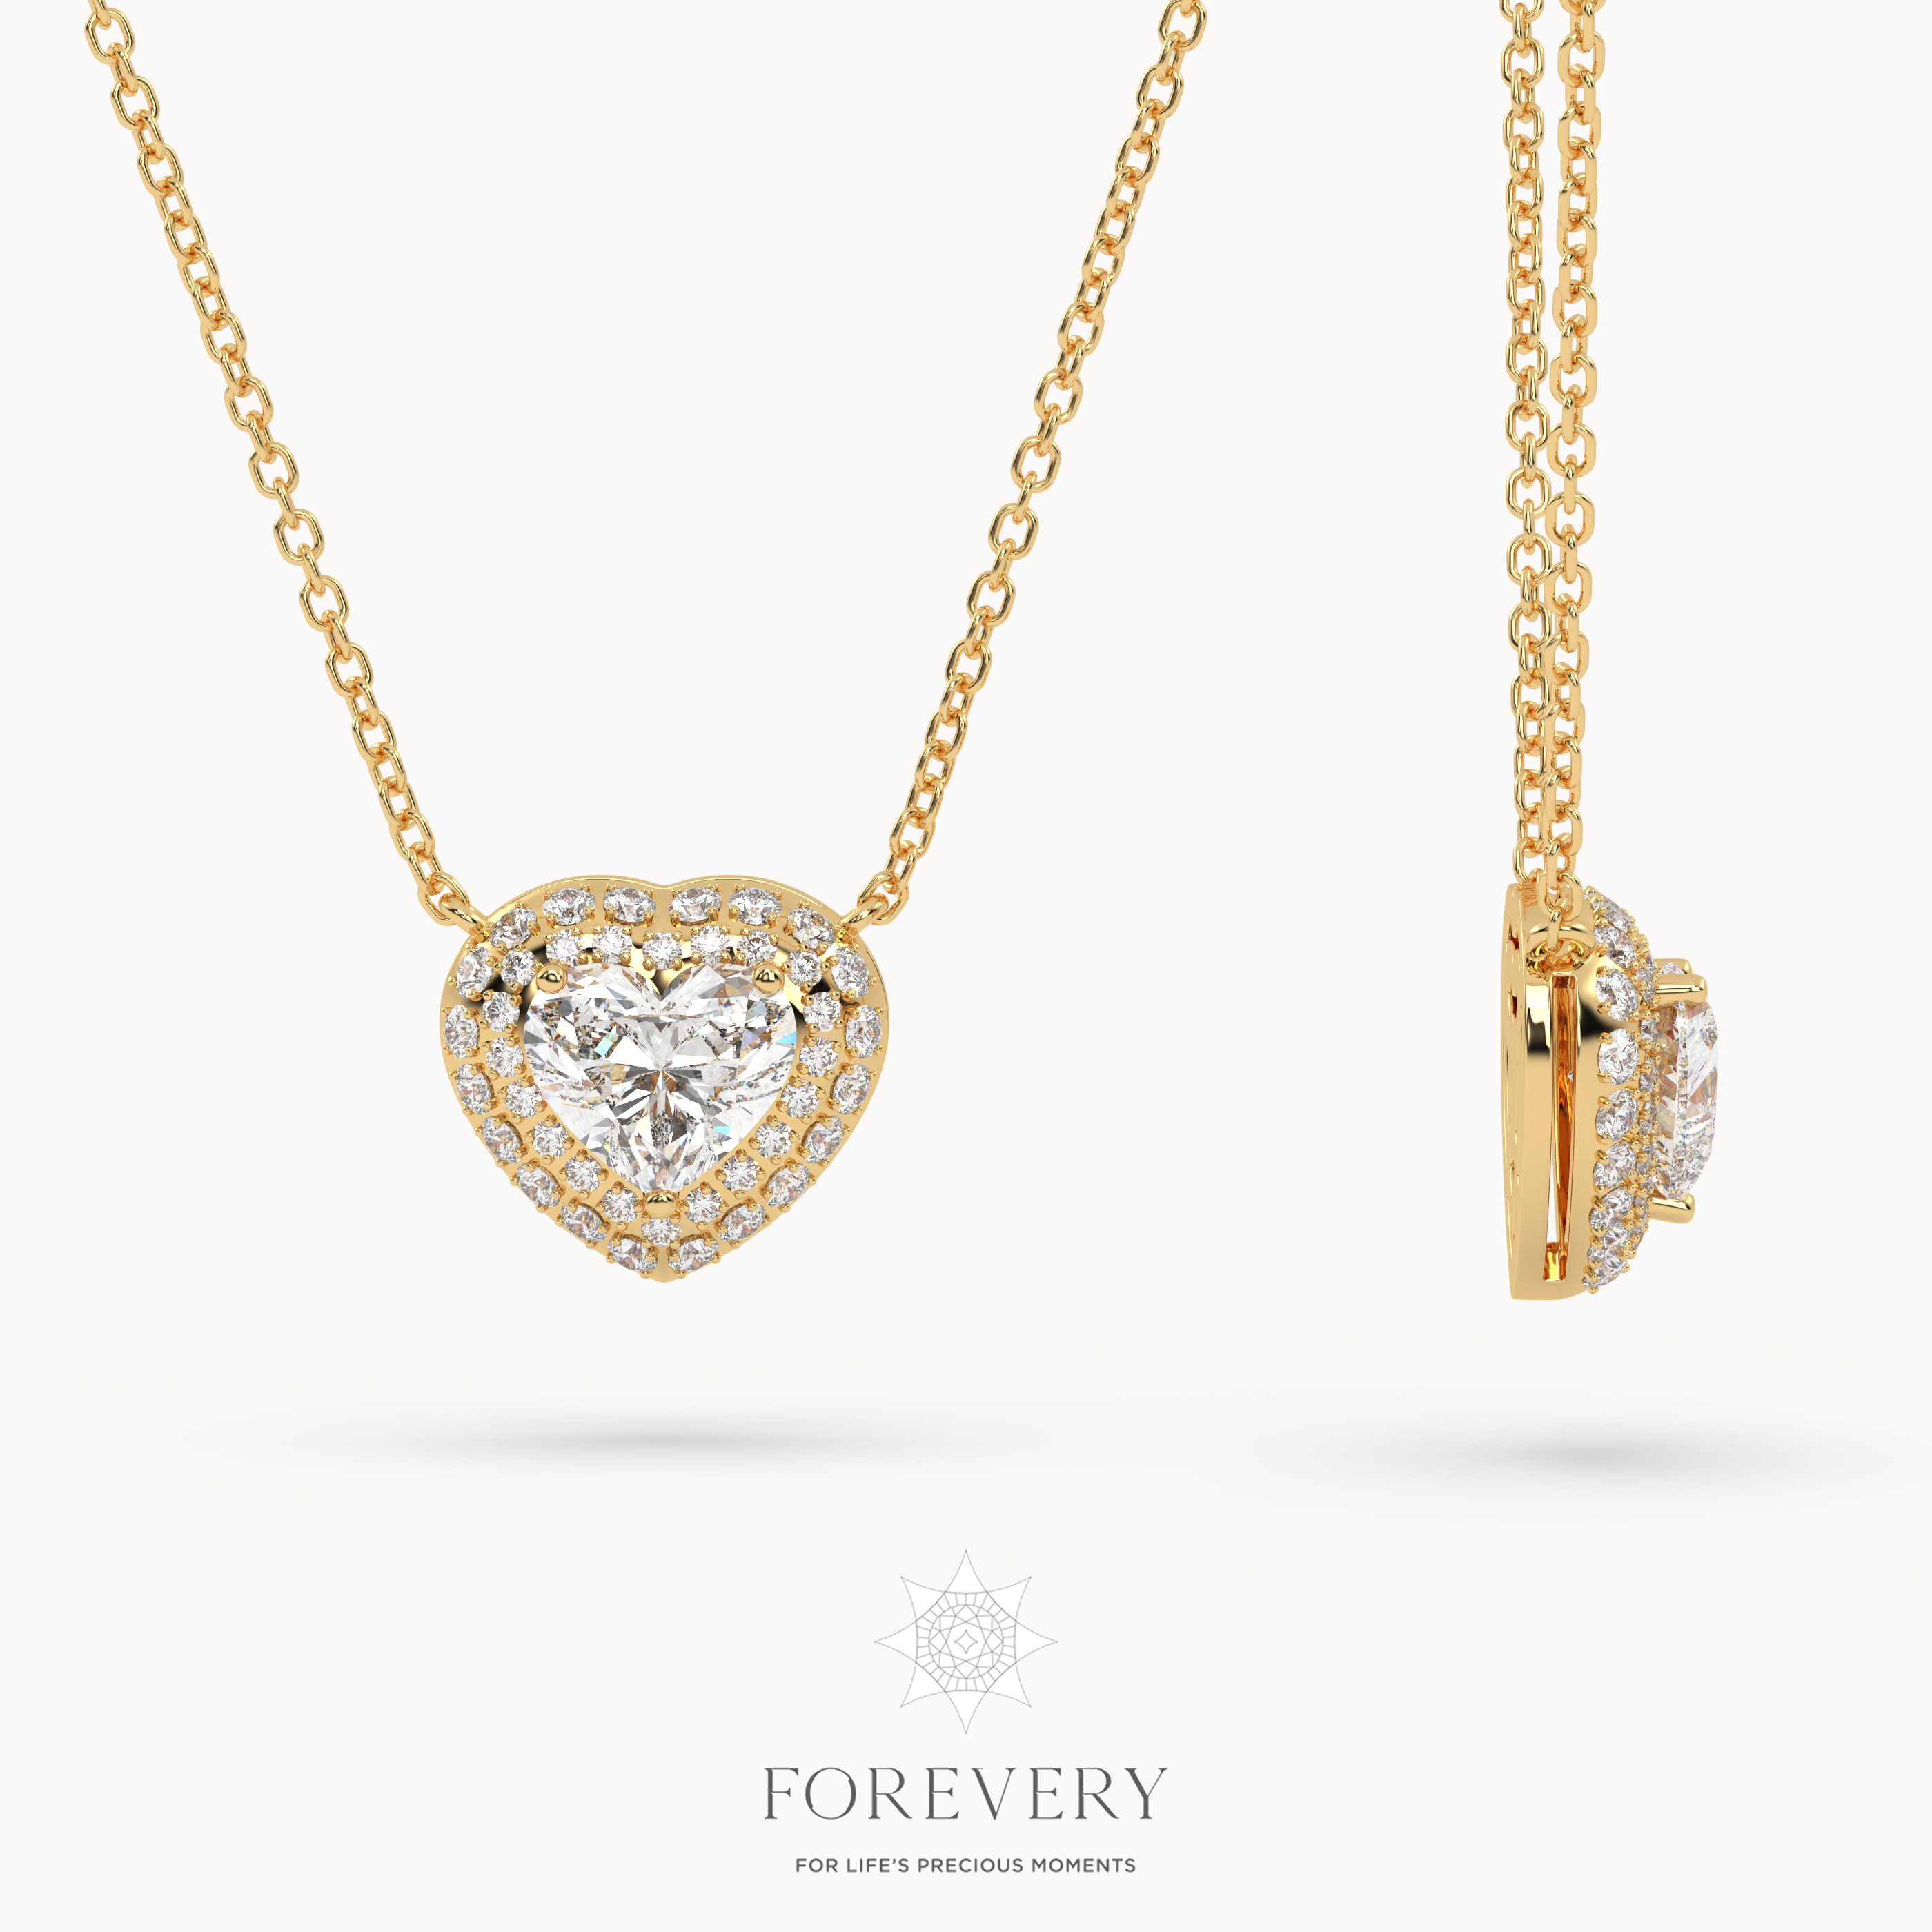 18K YELLOW GOLD Solitaire Pendant with Heart Shaped Diamond